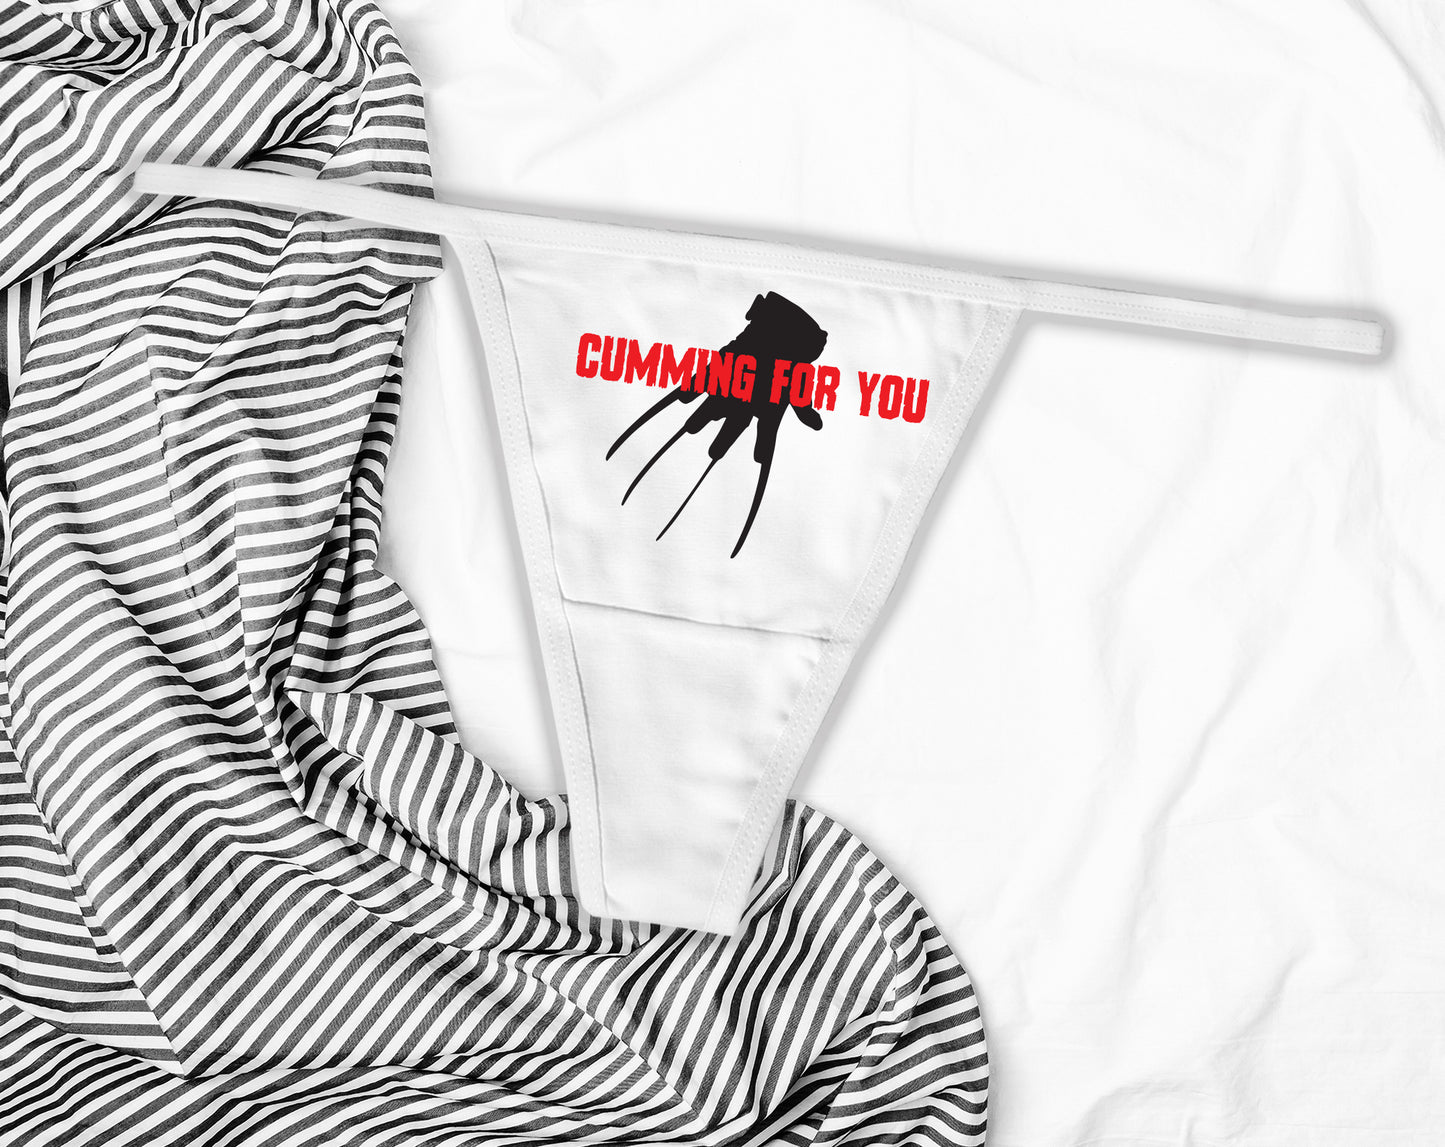 Halloween Thong, Cumming For You Panties, Horror Movie Panties, Freddy Glove, Funny Panties, Bachelorette Party, Panty Party, Gifts for Her